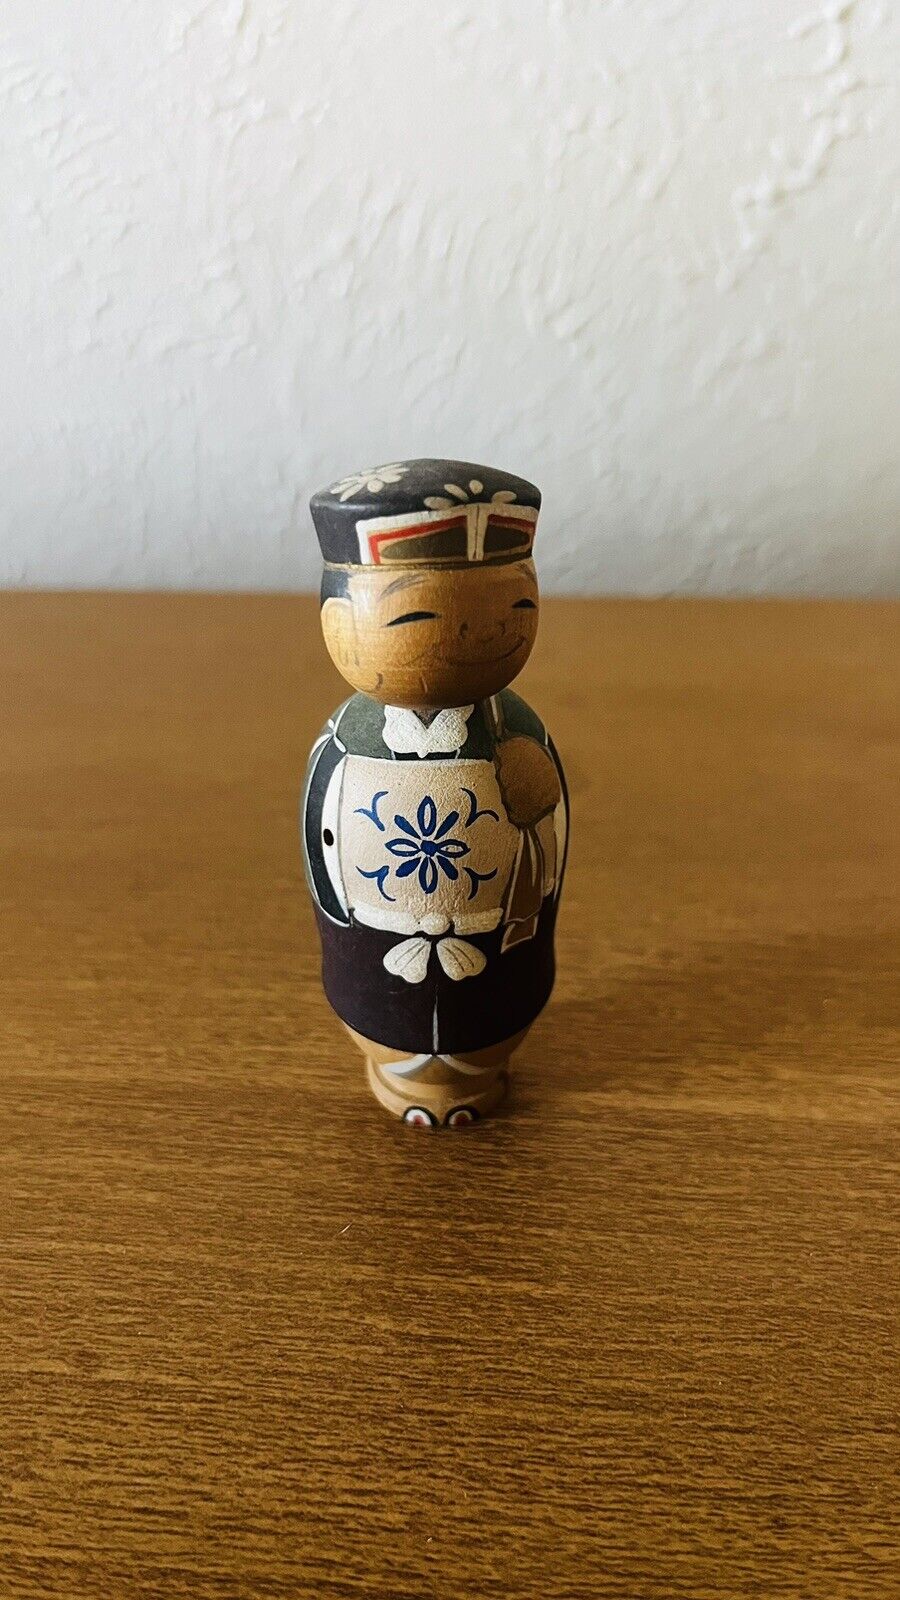 Vintage Traditional Bobblehead Hand Painted Wooden Decorative Kokeshi Doll 3”